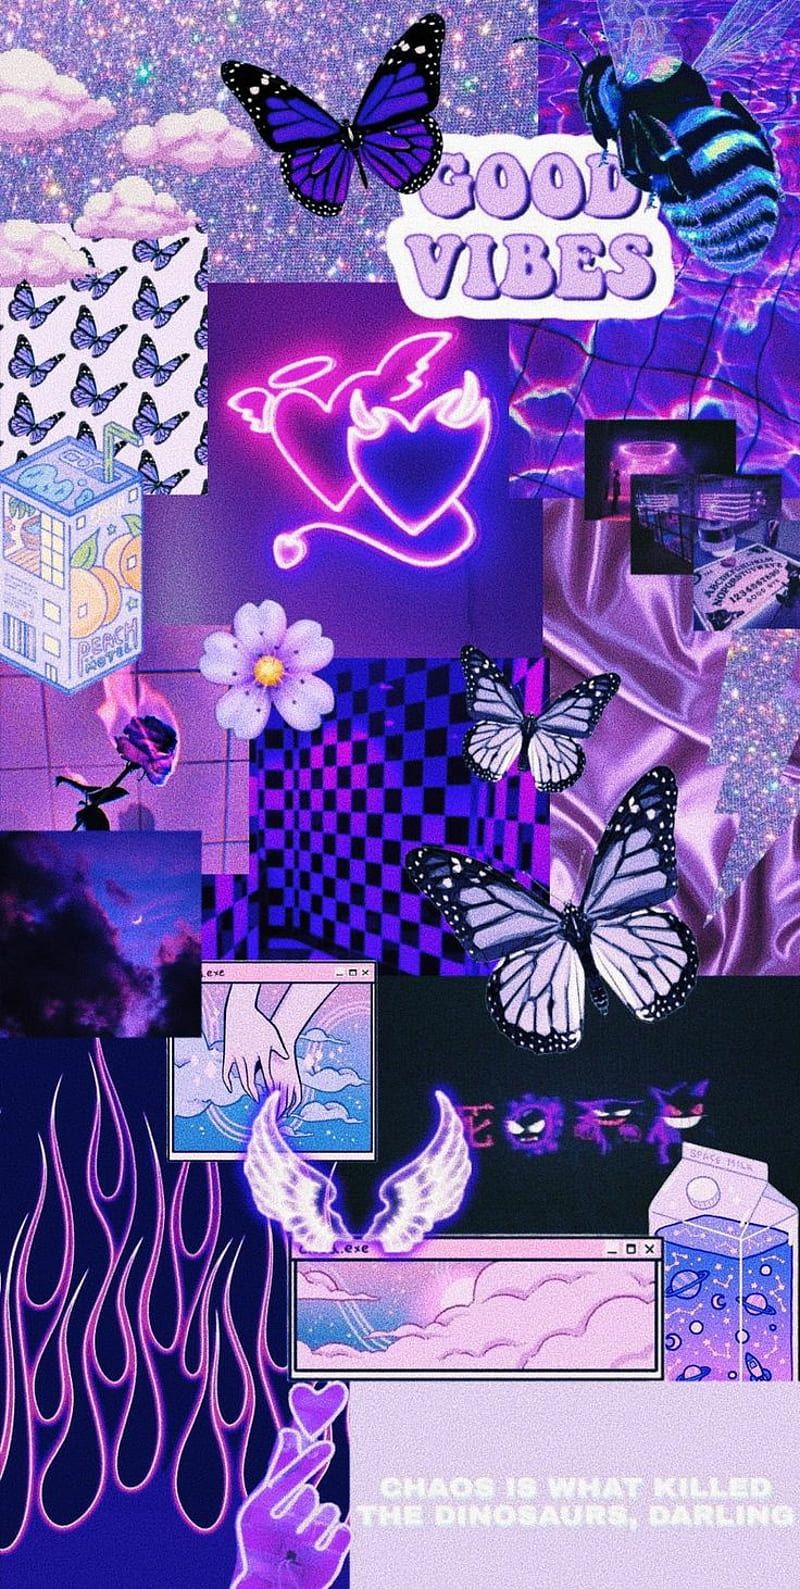 A collage of pictures with purple and pink colors - Violet, purple, cool, cute purple